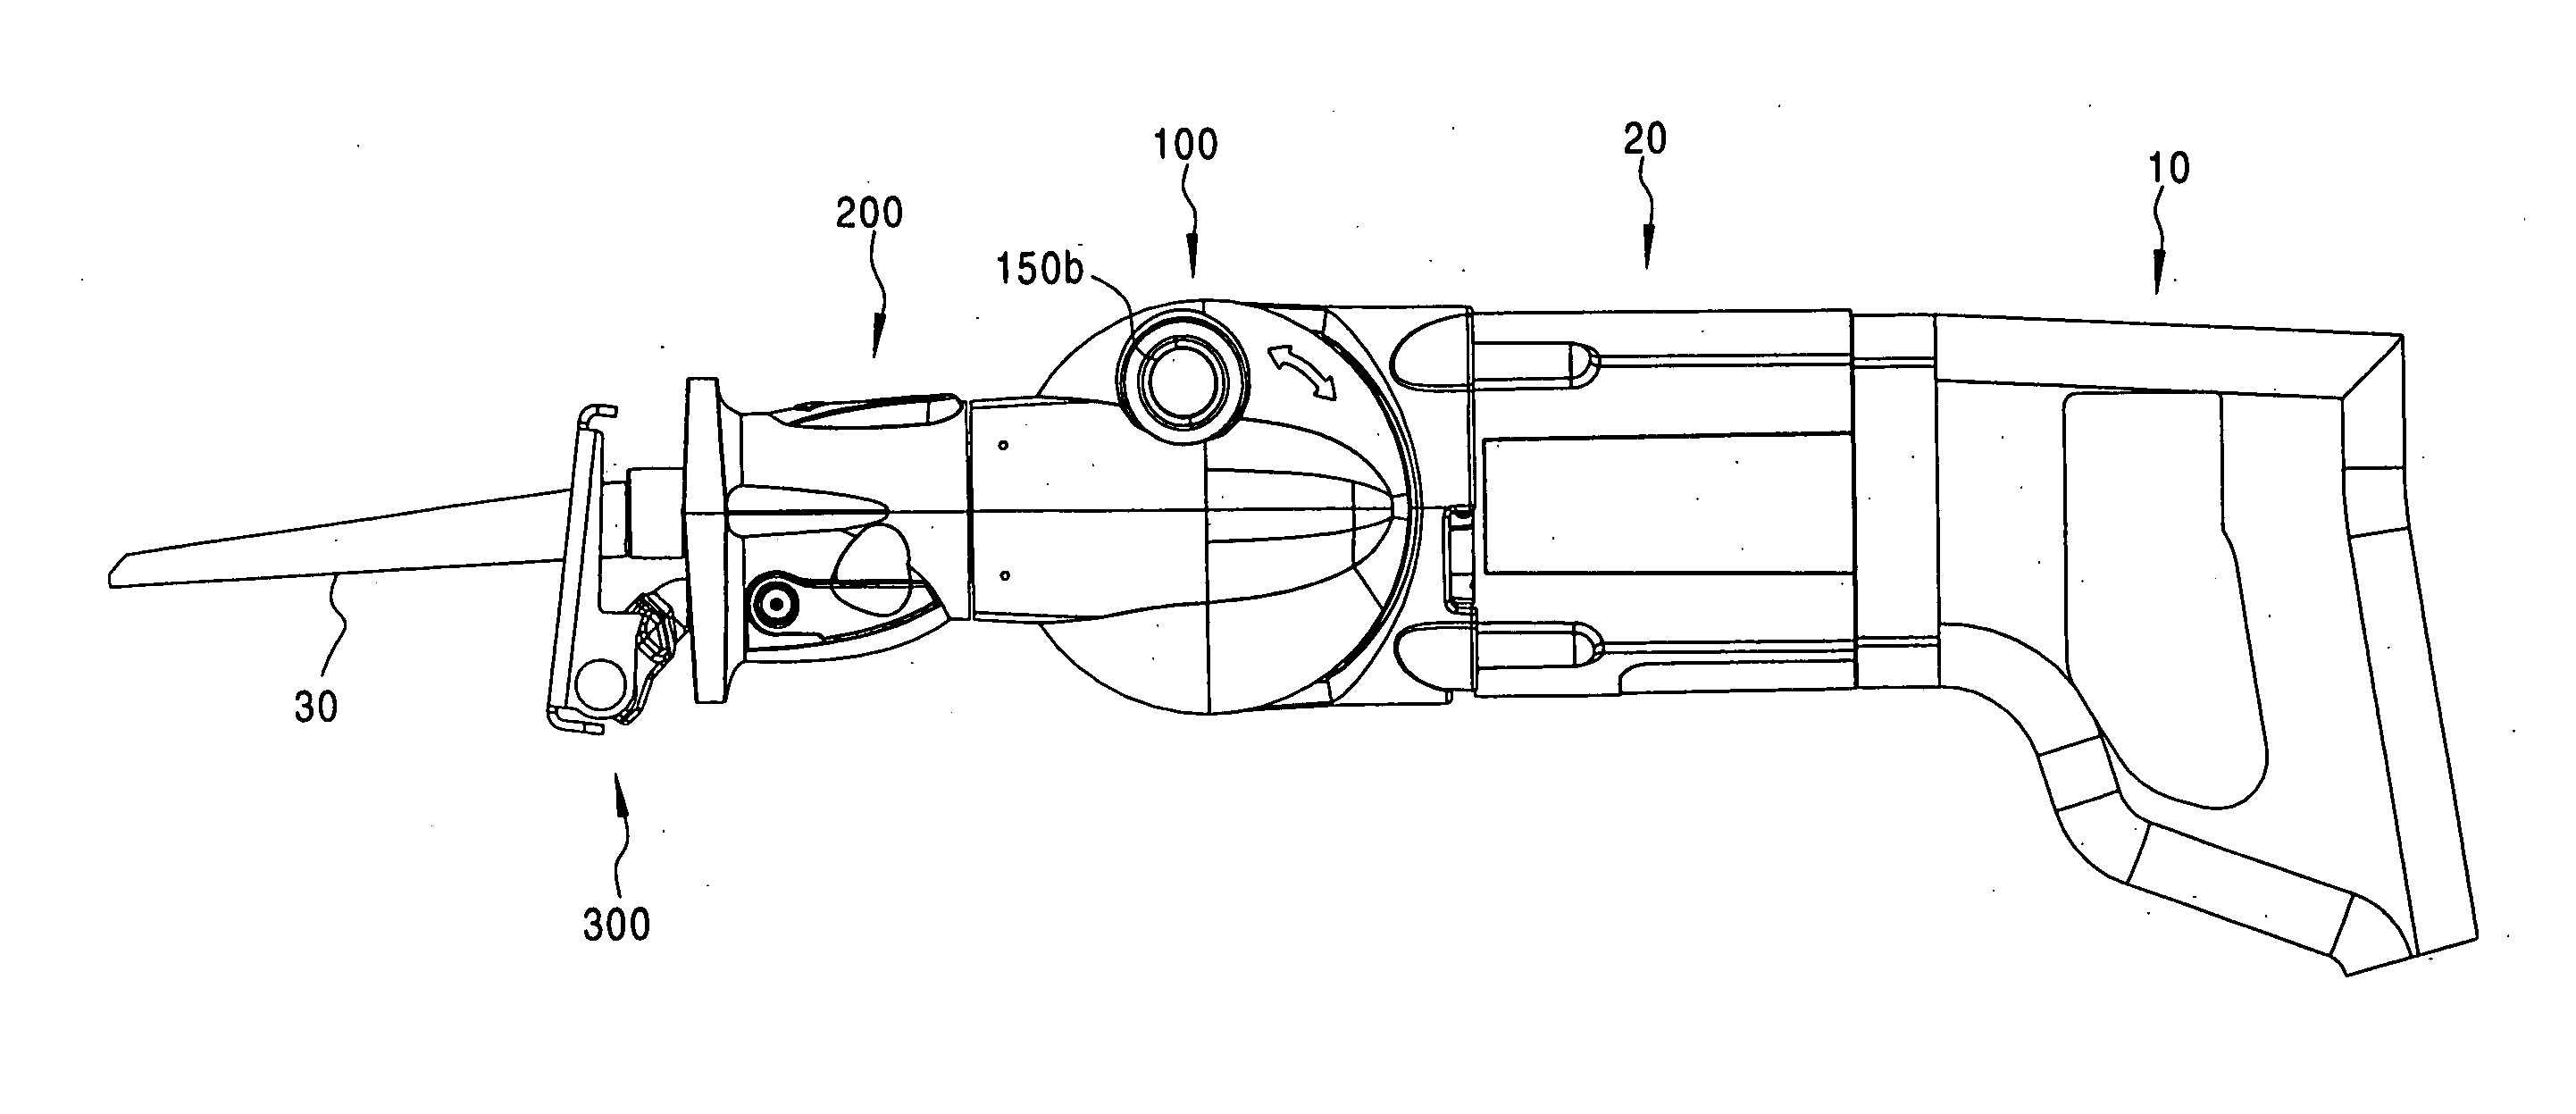 Bearing for a reciprocating shaft of a reciprocating saw